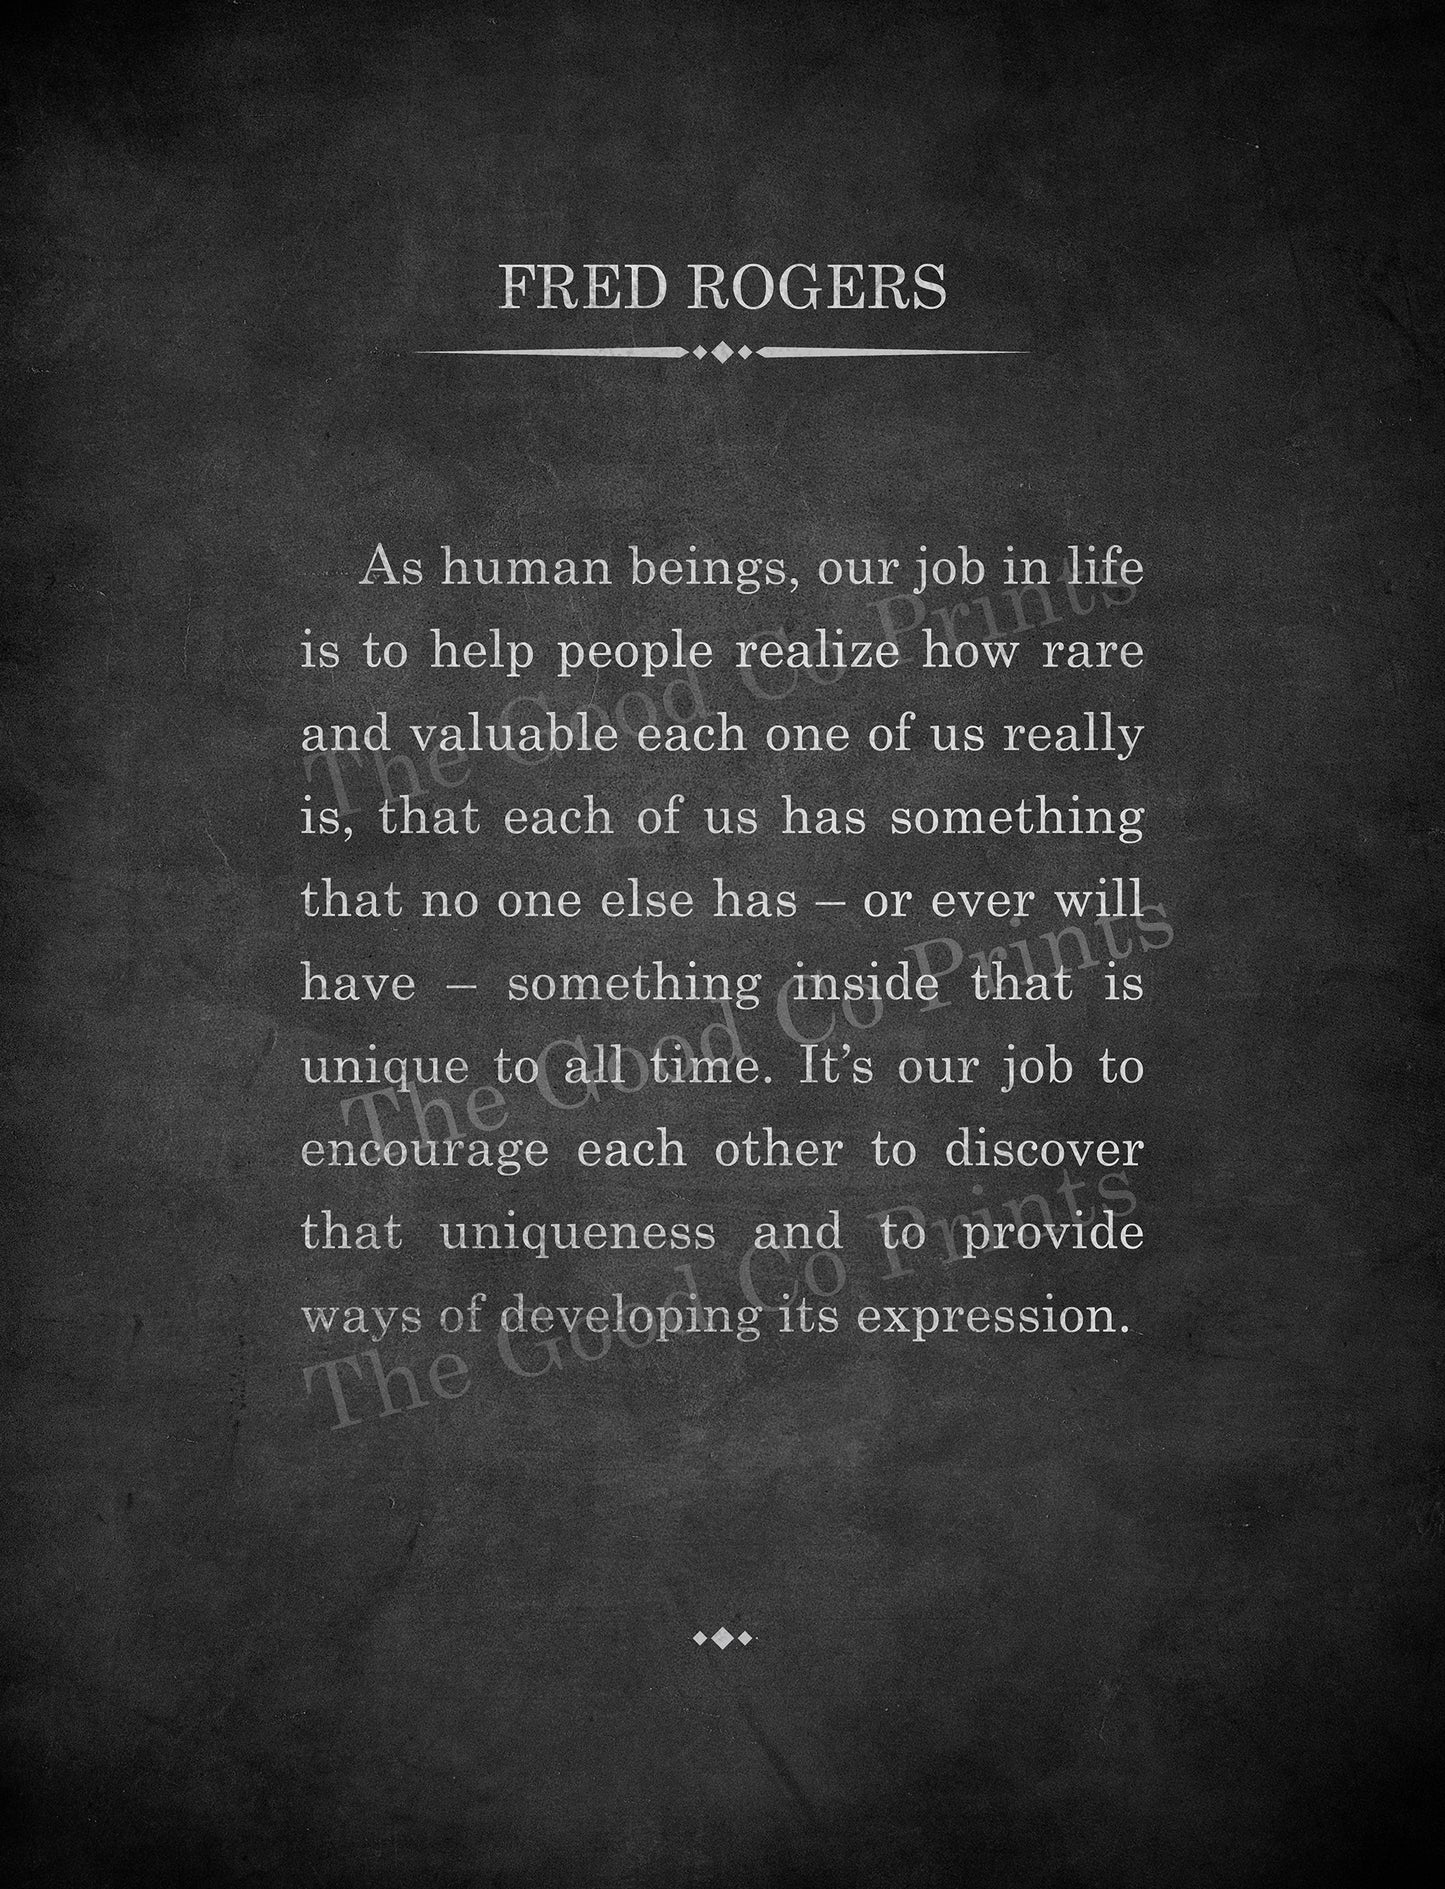 Fred Rogers Quote Art Print Inspirational Quote